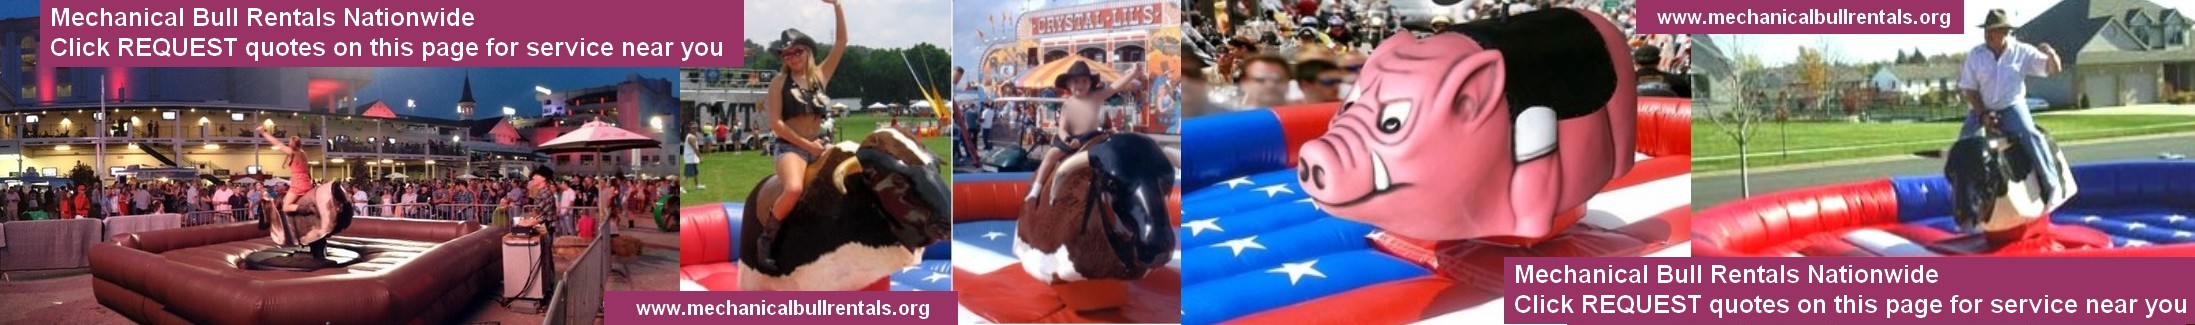 Mechanical Bull Rentals Worcester Massachusetts MA and near you. Free referrals to local mechanical bull companies LOGO